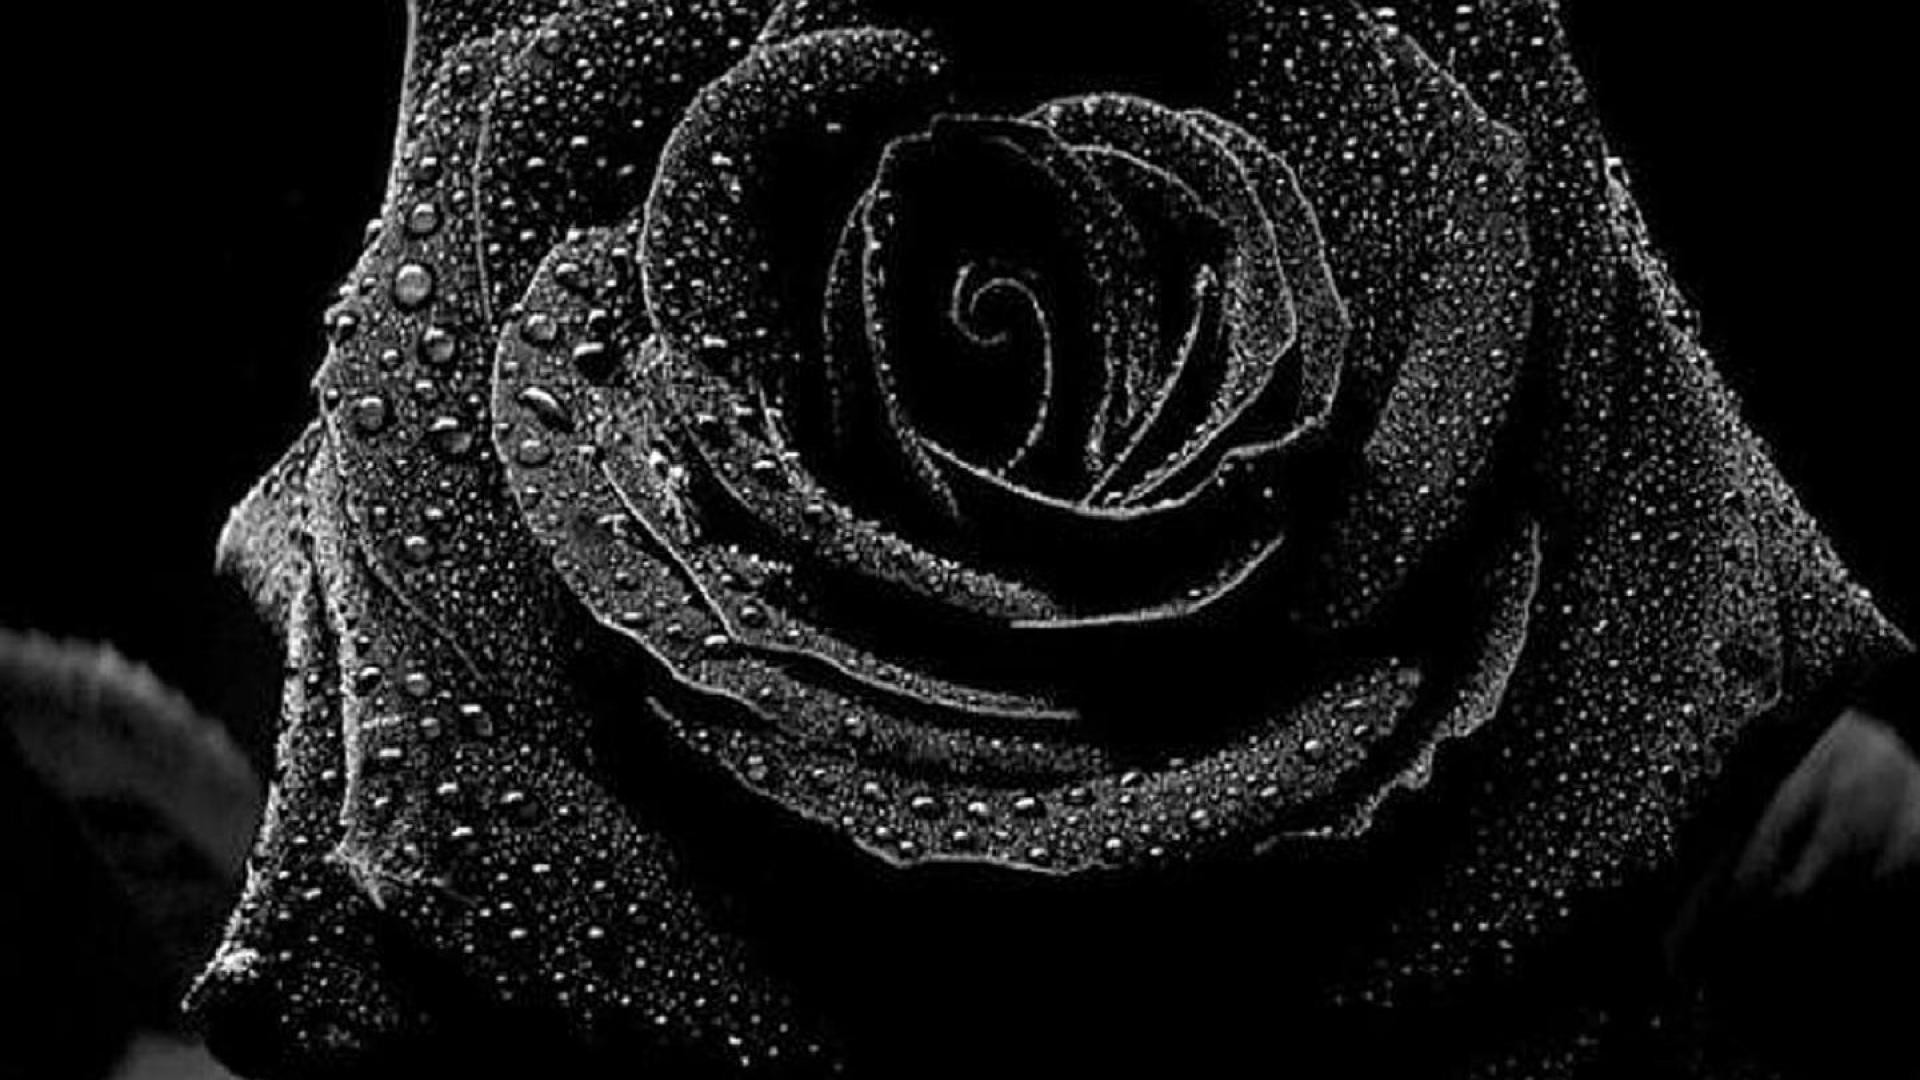 HD Shine On Rose Wallpaper Download Free – 95074 wallpapers,themes,ect. Pinterest Rose wallpaper, Wallpaper and Rose